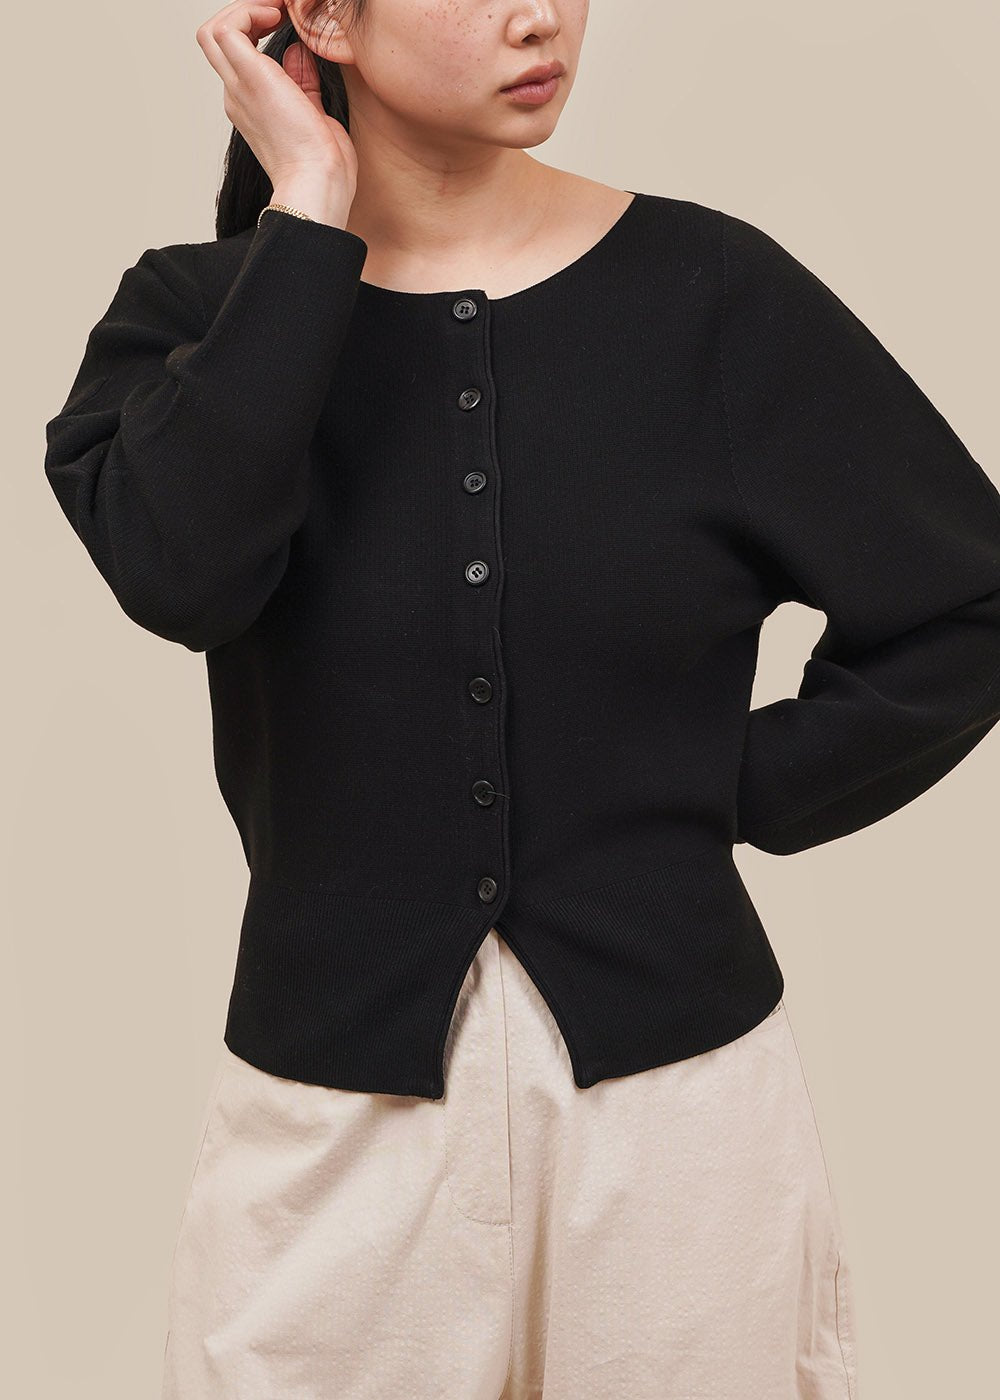 Whole Garment Rounded Cardigan in Black by AMOMENTO – New Classics